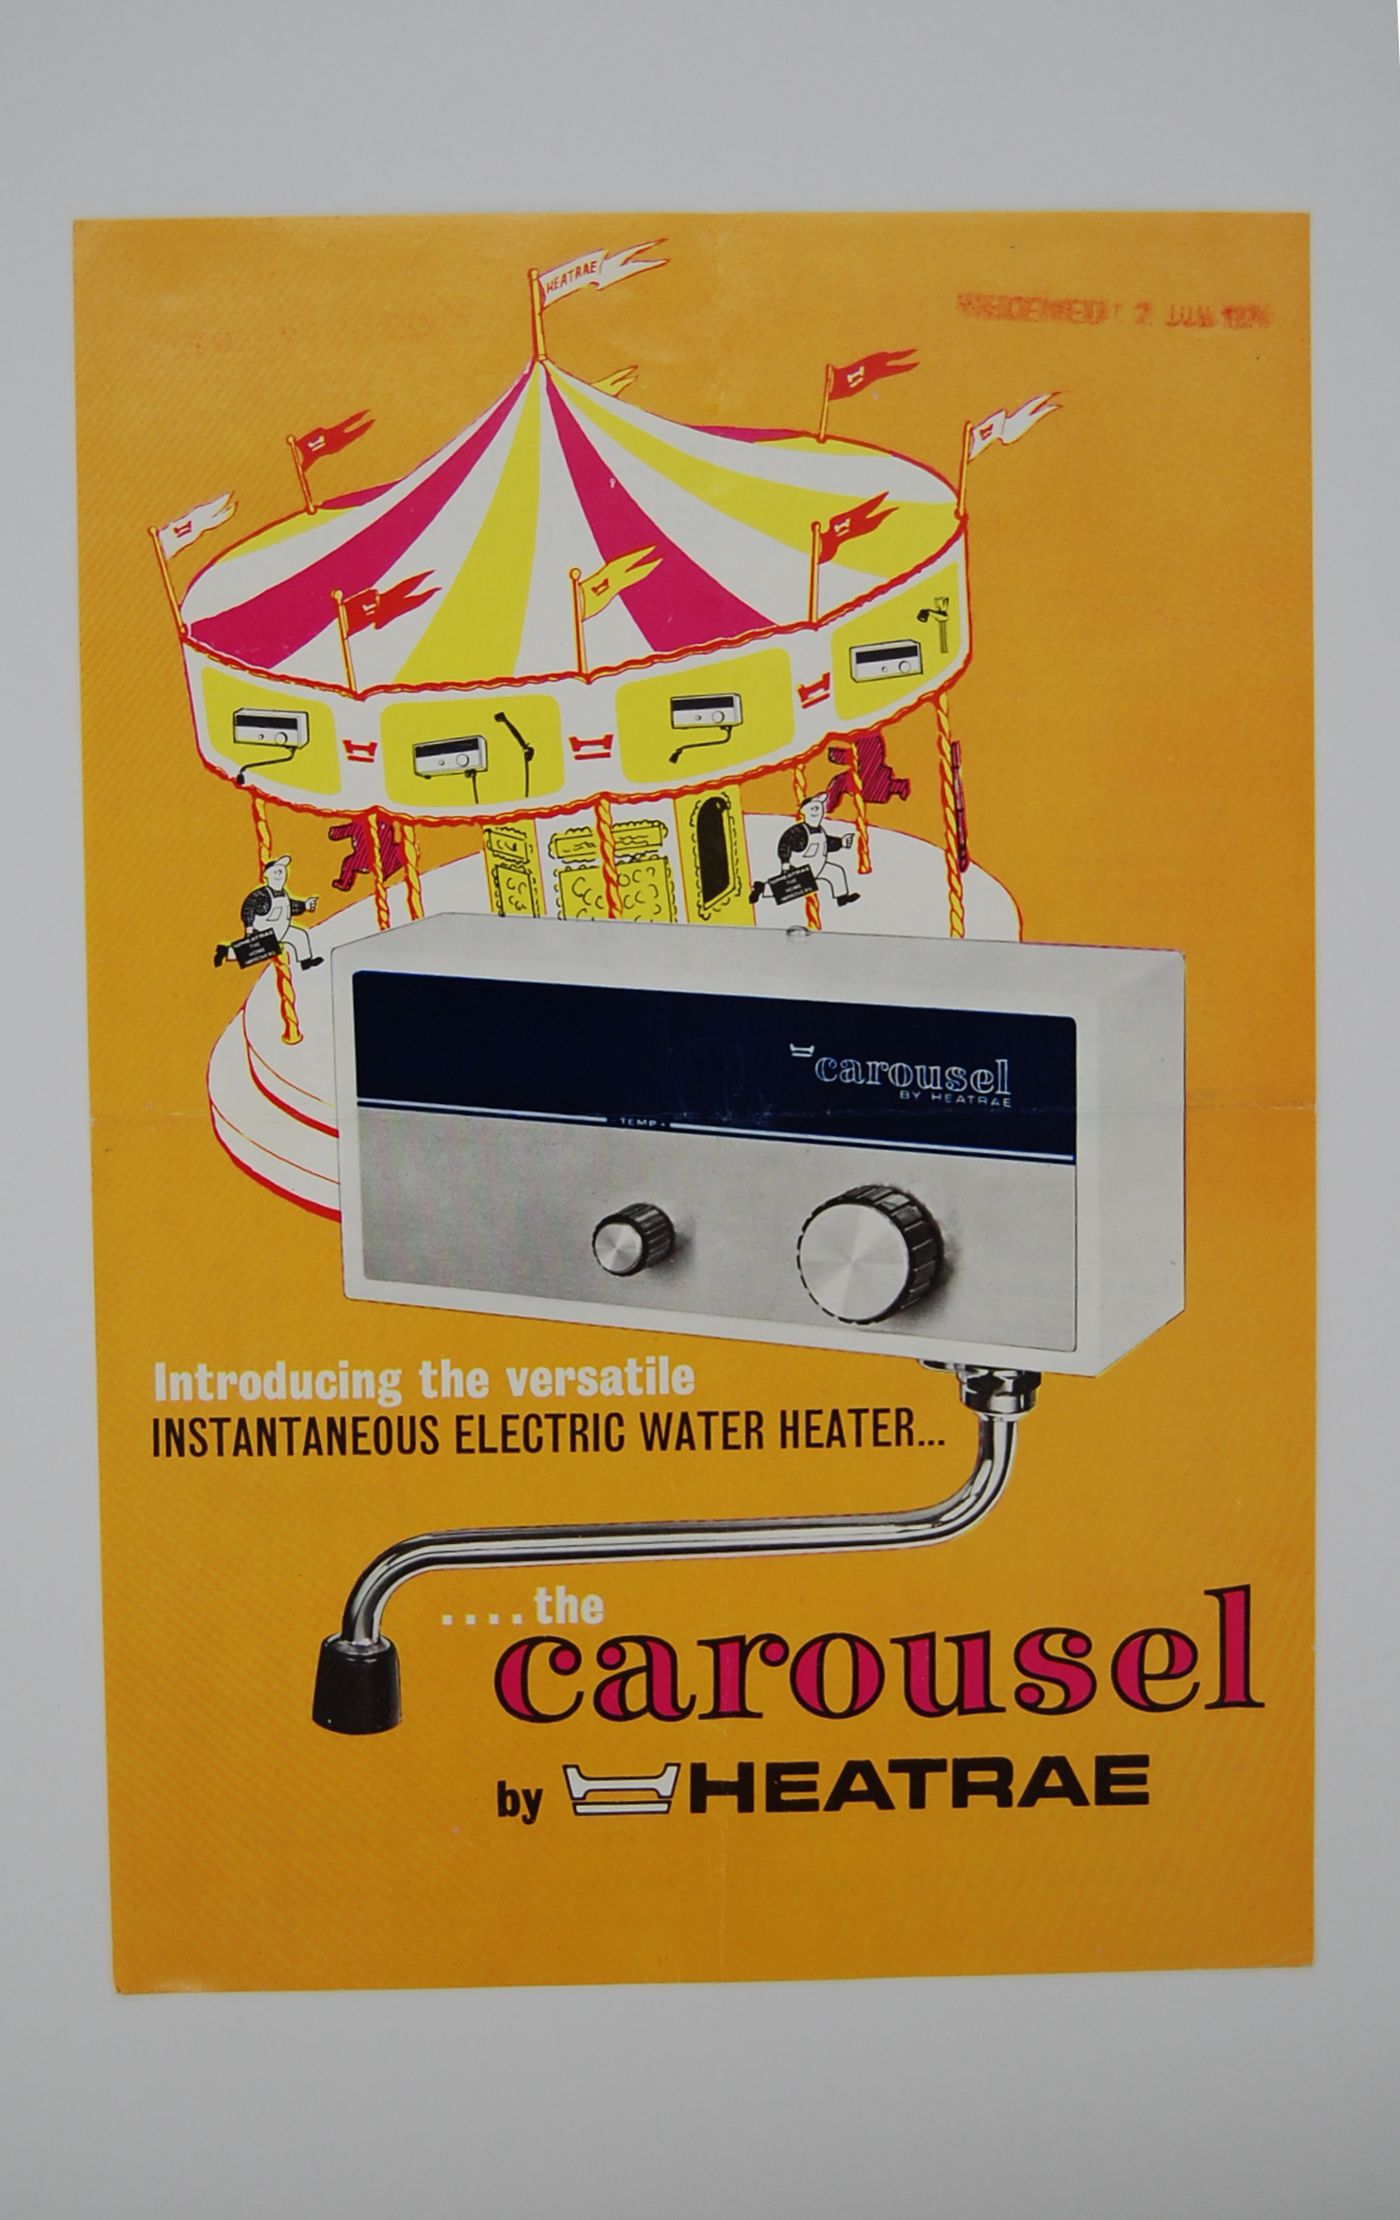 Introducing the versatile instantaneous electric water heater... ....the carousel by Heatrae